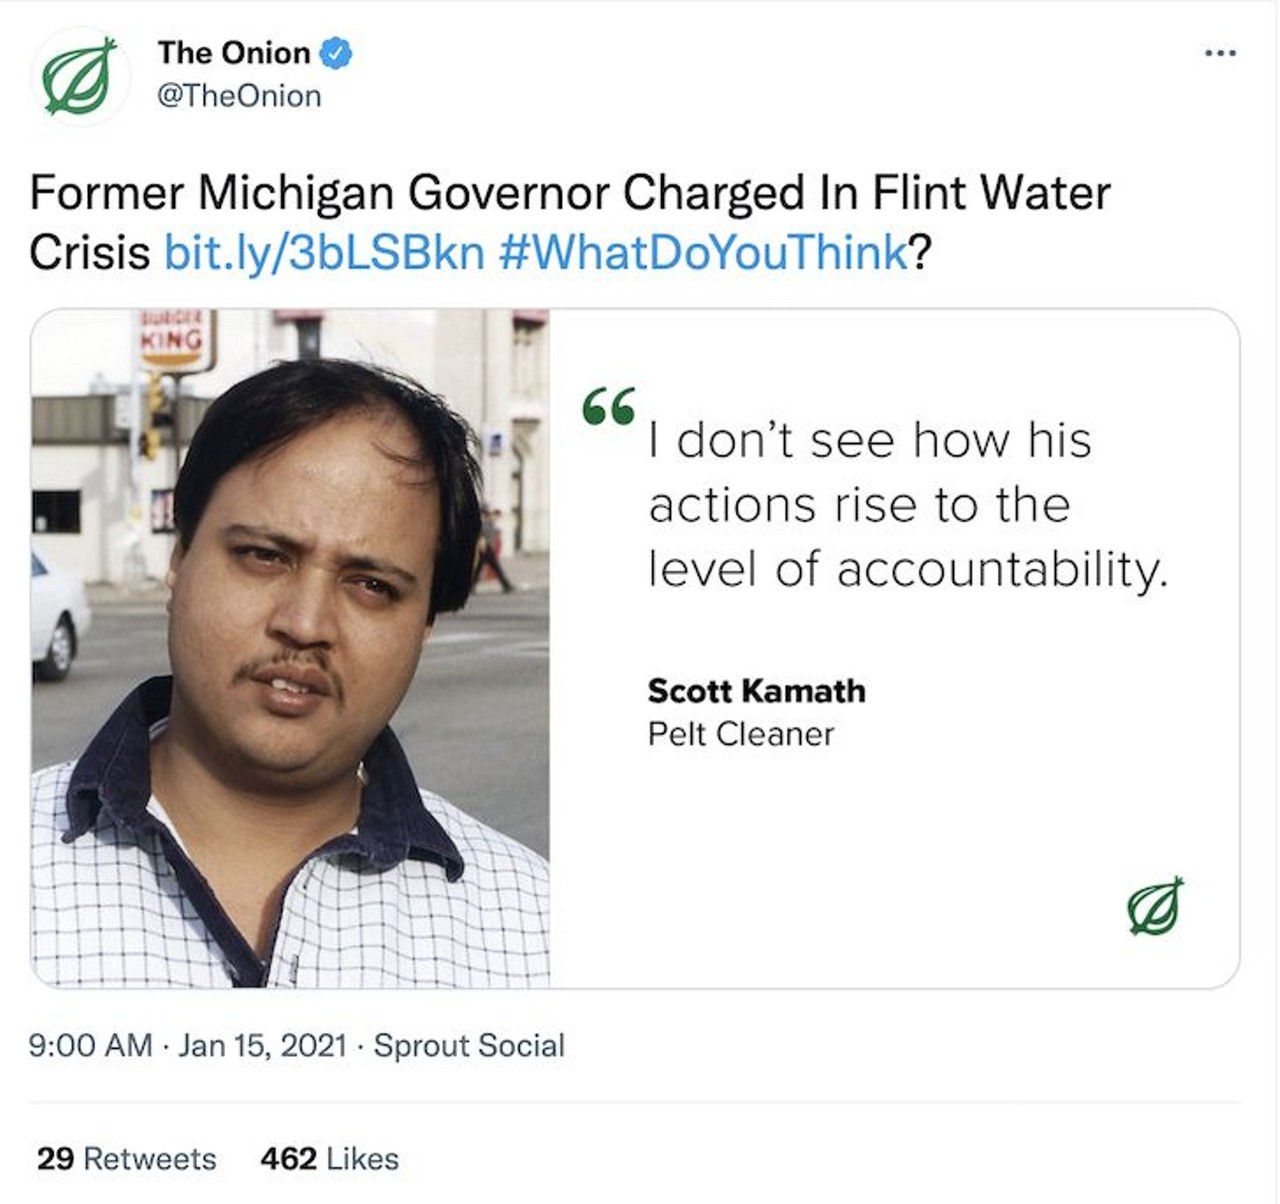 Former Michigan Governor Charged In Flint Water Crisis
Former Governor Rick Snyder is charged in January for the role he played in the Flint water crisis. &#147;I think that the people who had to drink the water ought to take some responsibility for this, too,&#148; one man on the street commenter said.